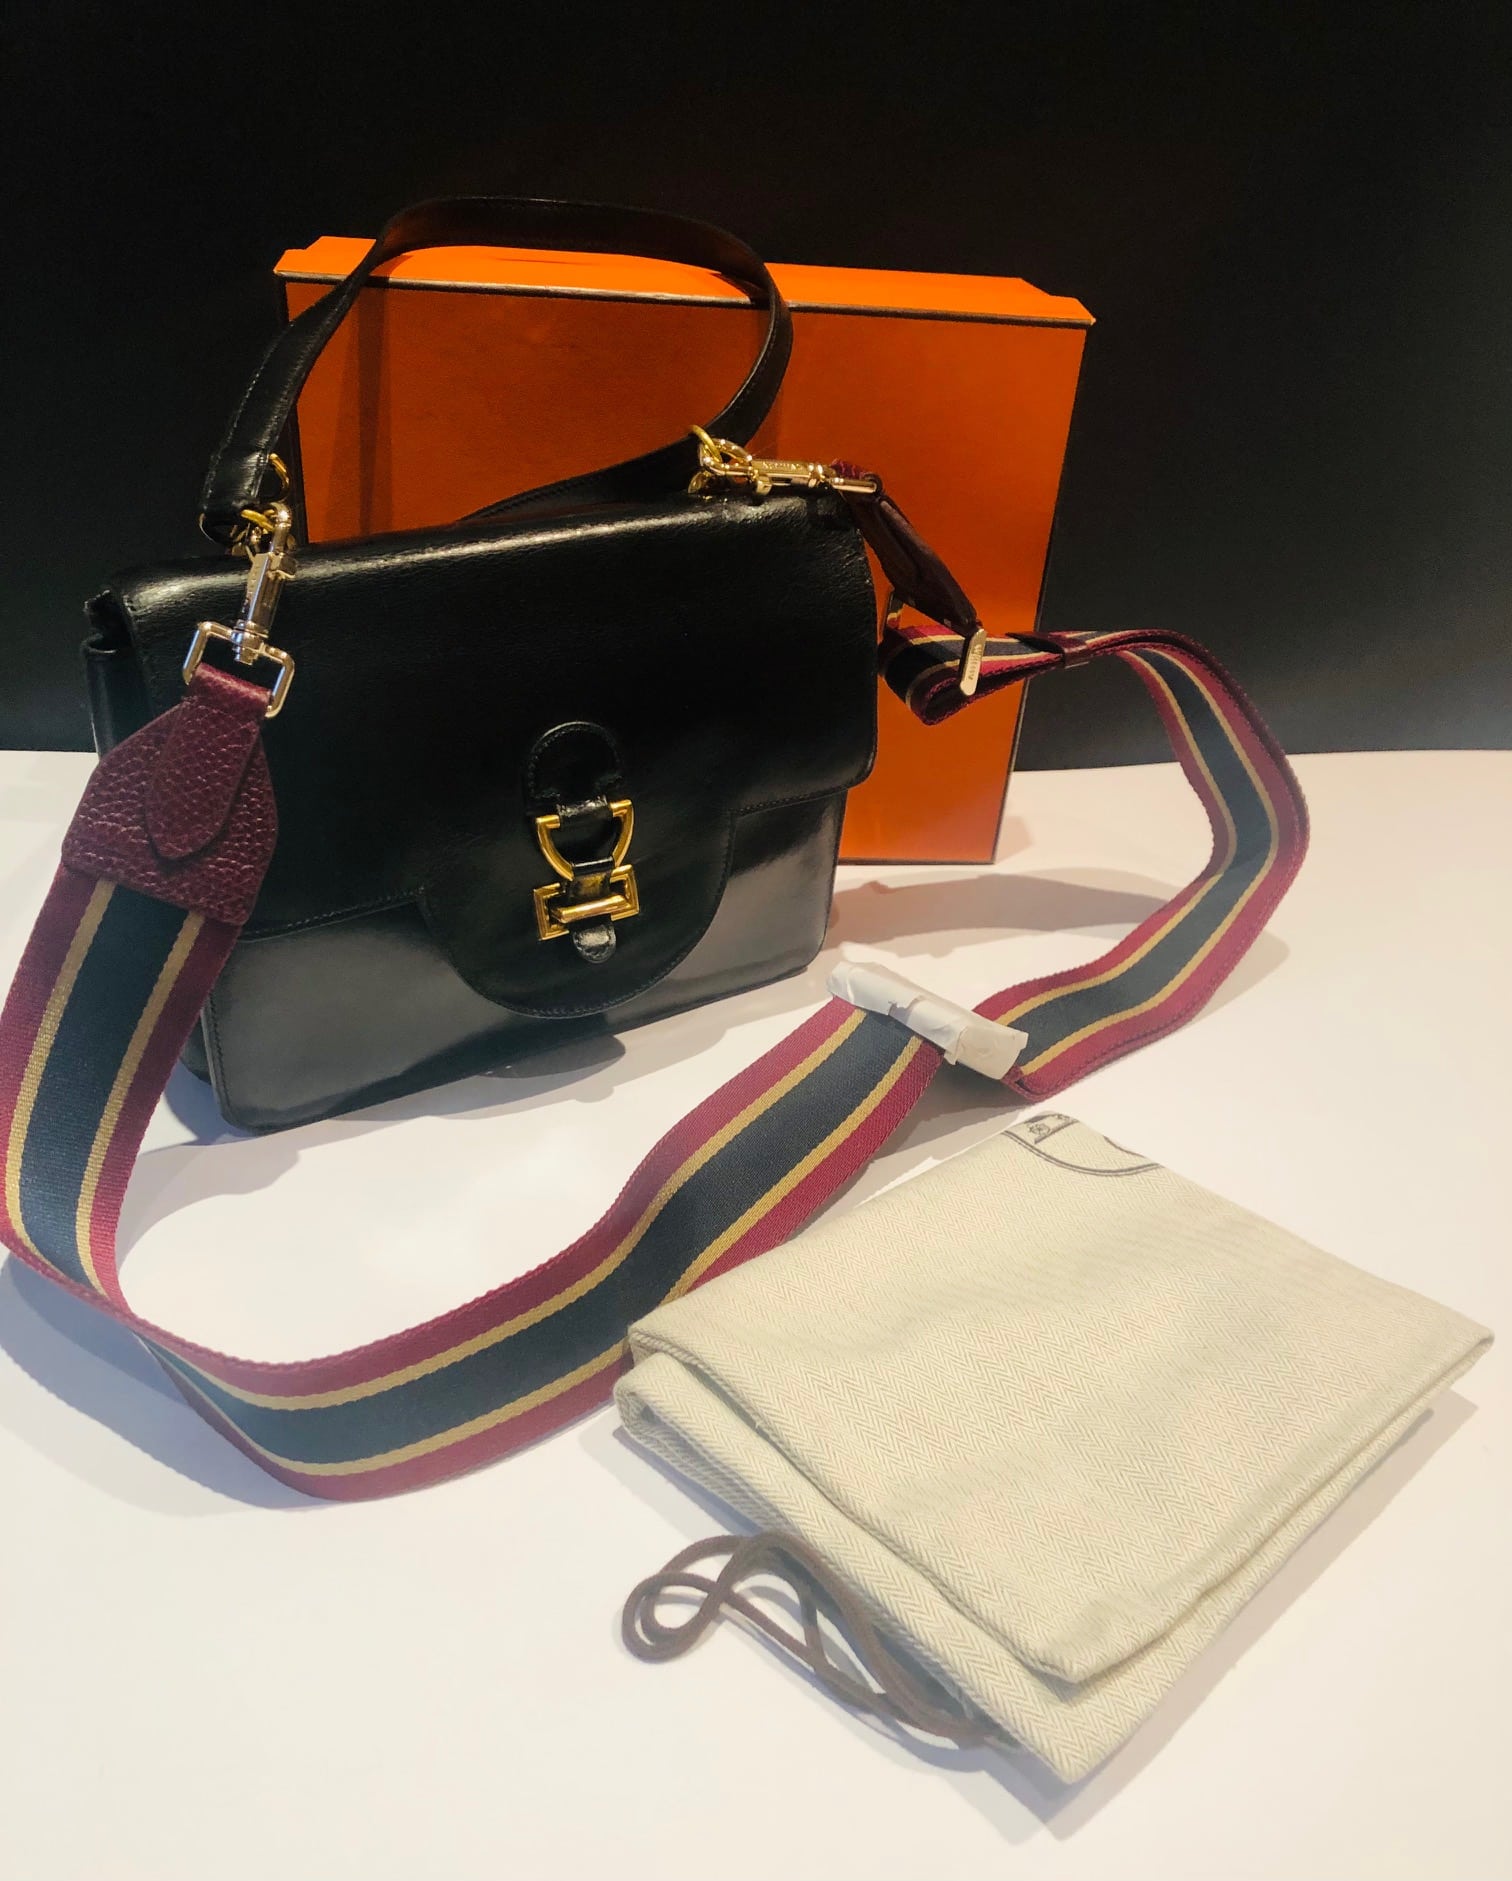 Sold at Auction: Guy Laroche Leather Purse